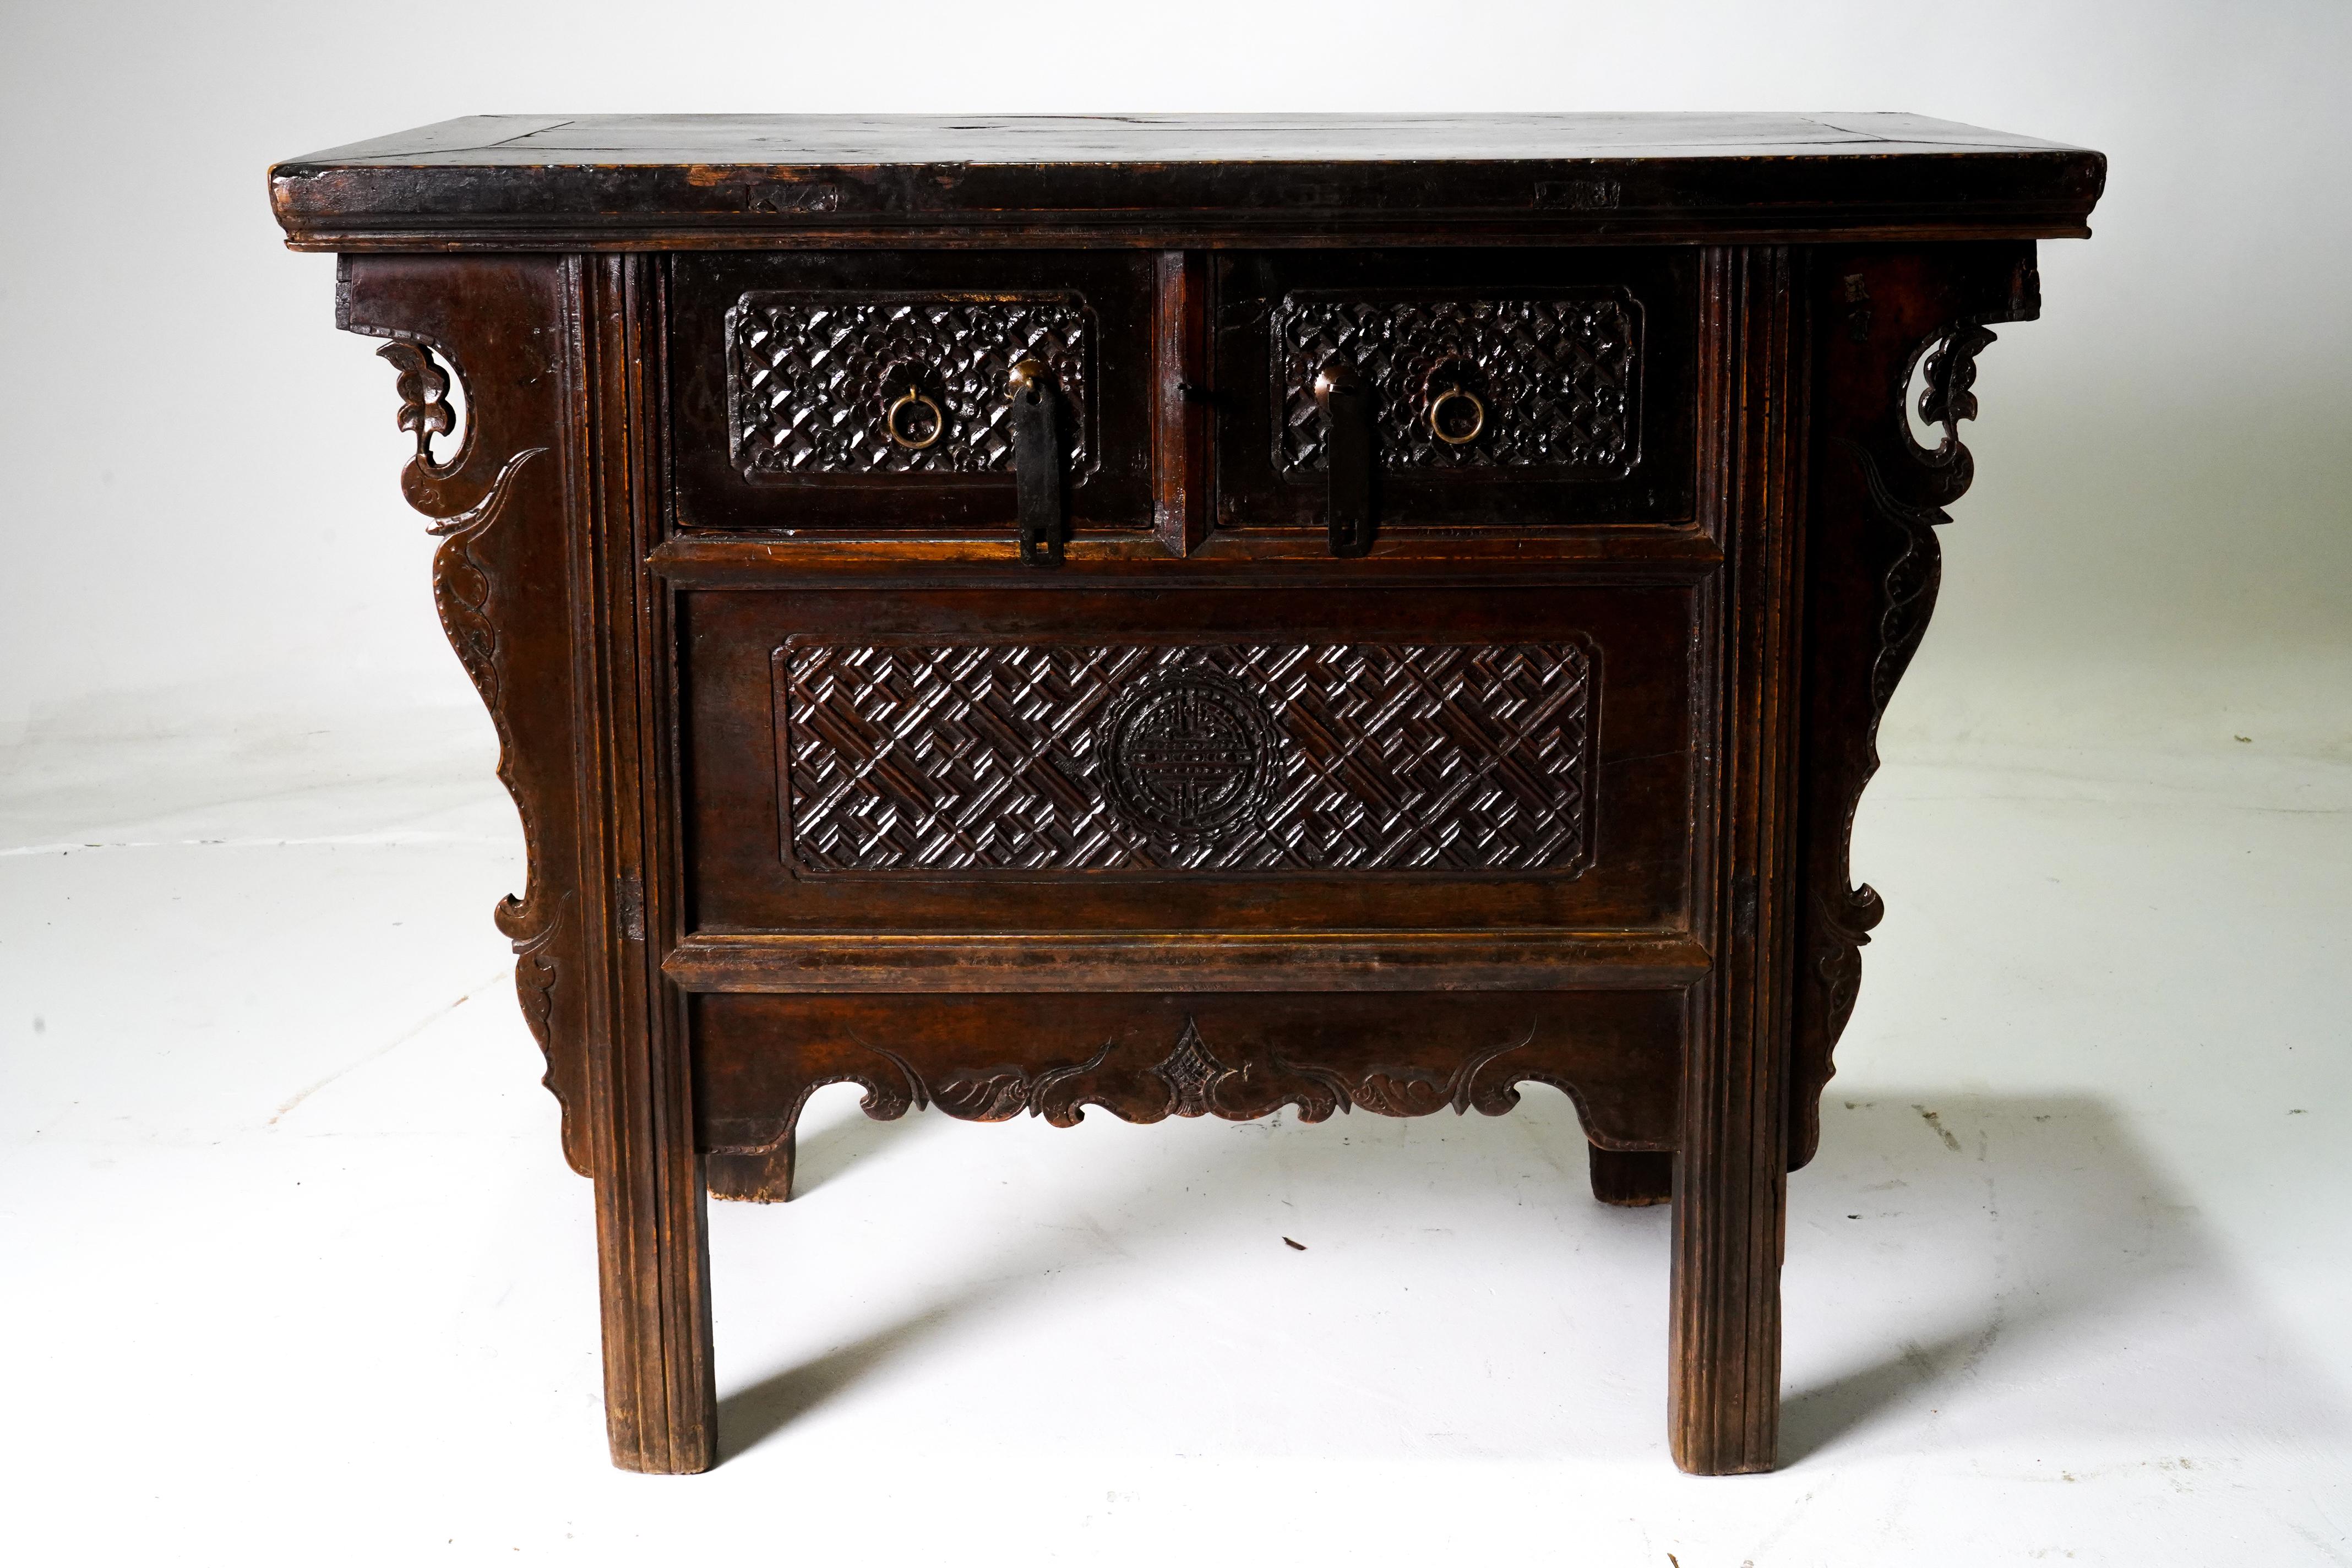 This elegant small Chinse coffer, called a butterfly cabinet, features a floating panel top sitting above two carved drawers, each and fitted with brass hardware. Beneath the drawers is a a richly carved floating panel, which hides interior storage.